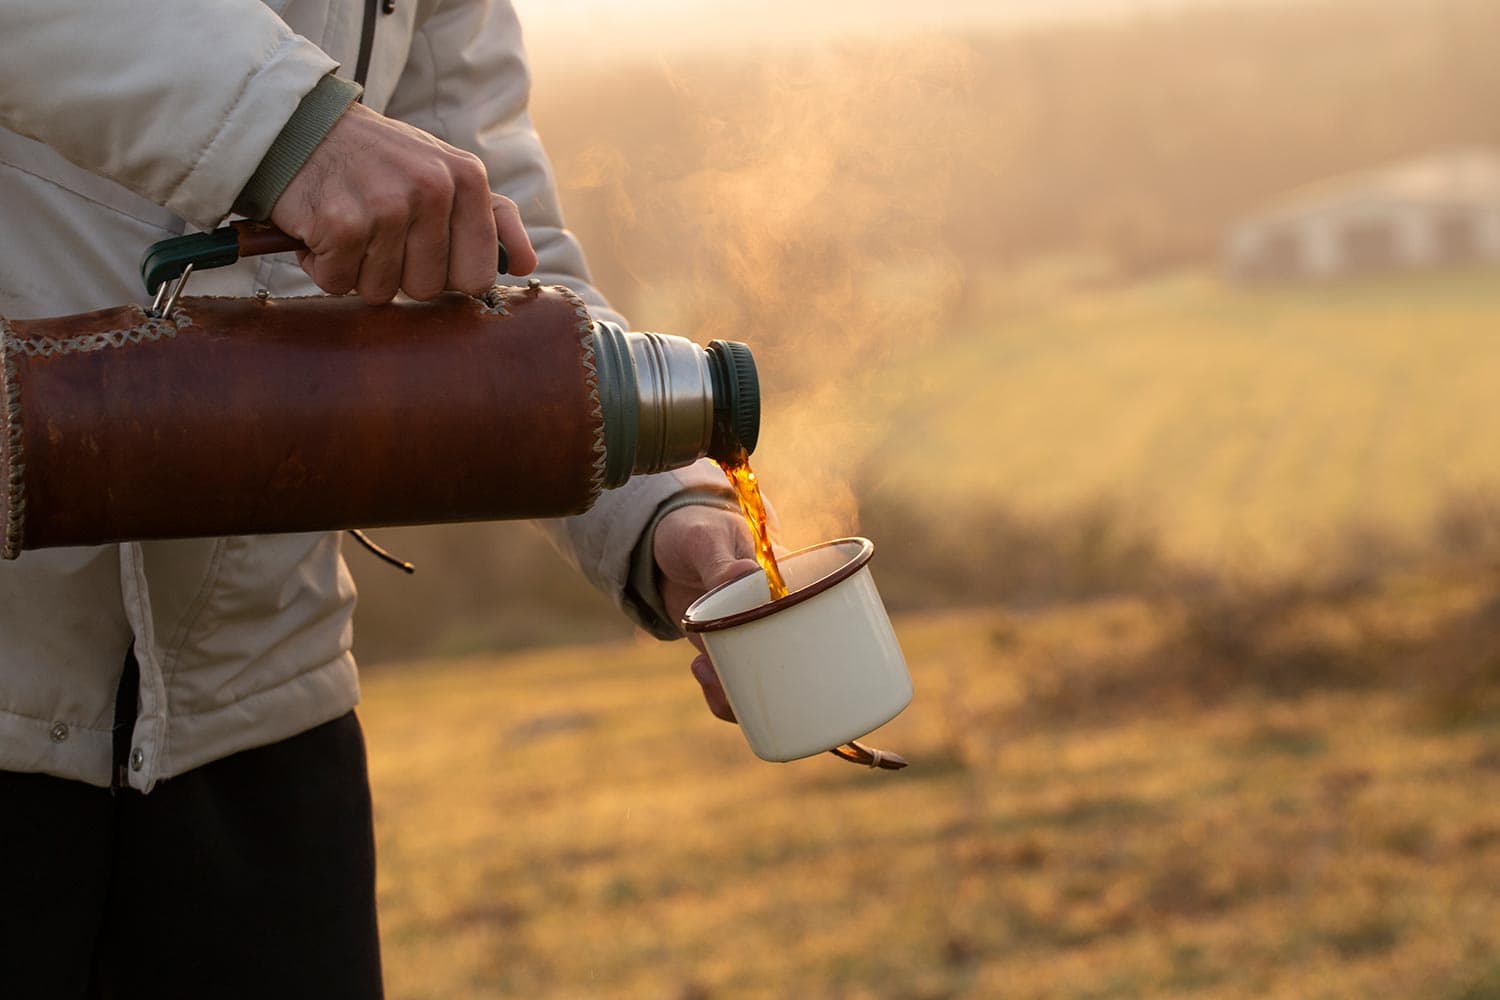 Pouring mug of coffee from a hot thermos